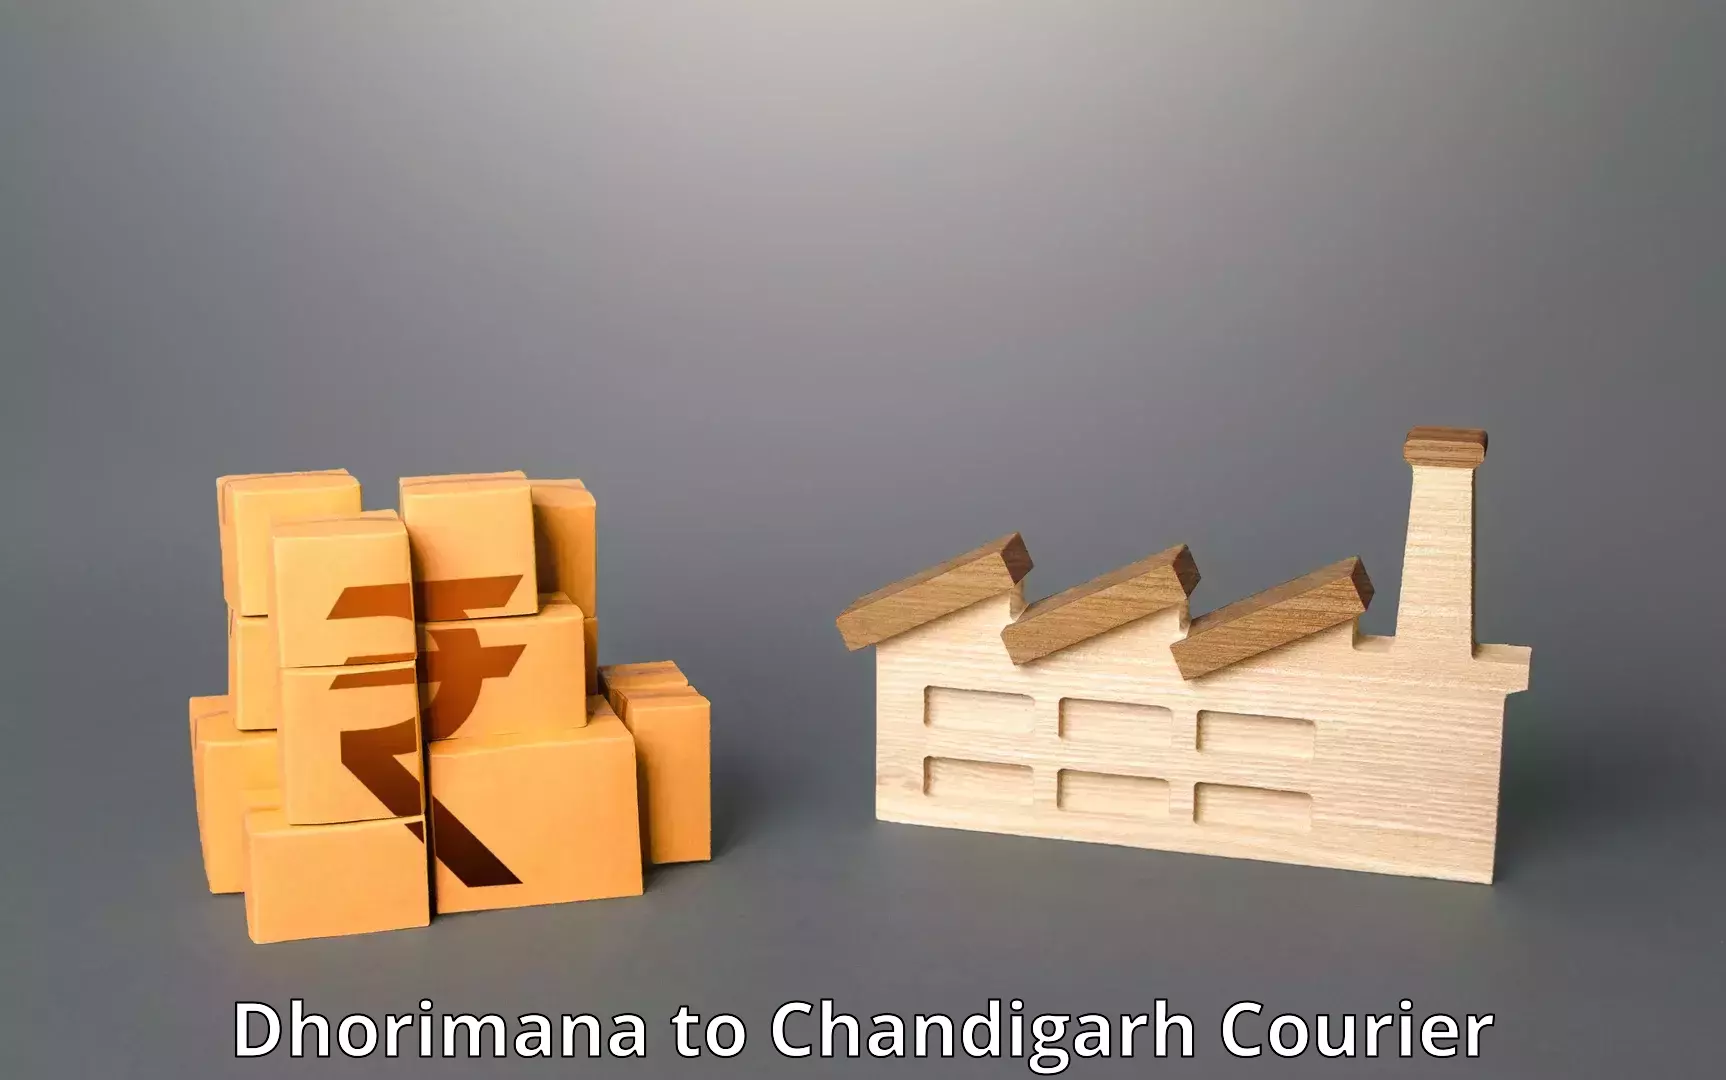 End-to-end delivery Dhorimana to Chandigarh